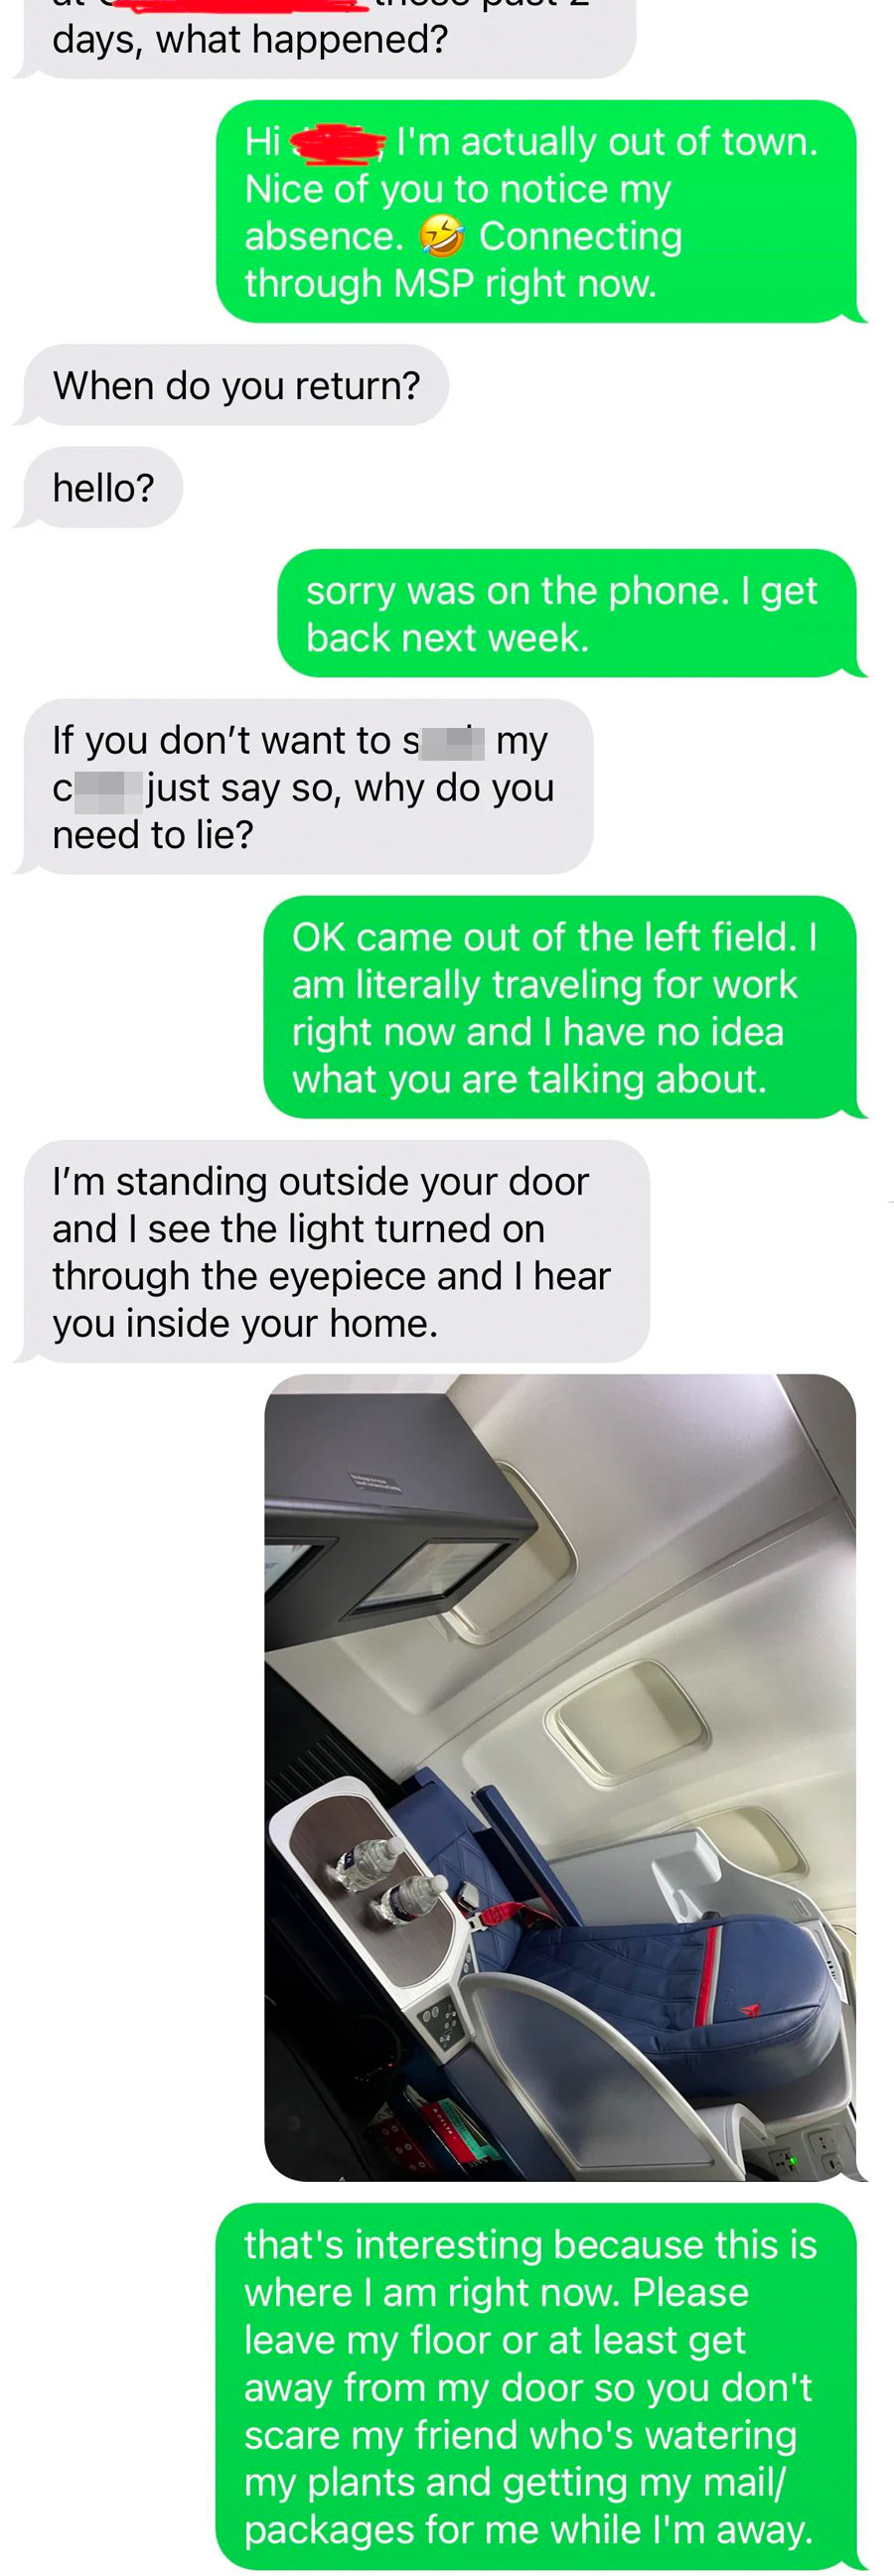 A person tries to proposition their neighbor for sex, the neighbor says they&#x27;re out of town, the creeper says they&#x27;re outside their neighbor&#x27;s door and can hear them inside, and the neighbor says their friend is watering their plants